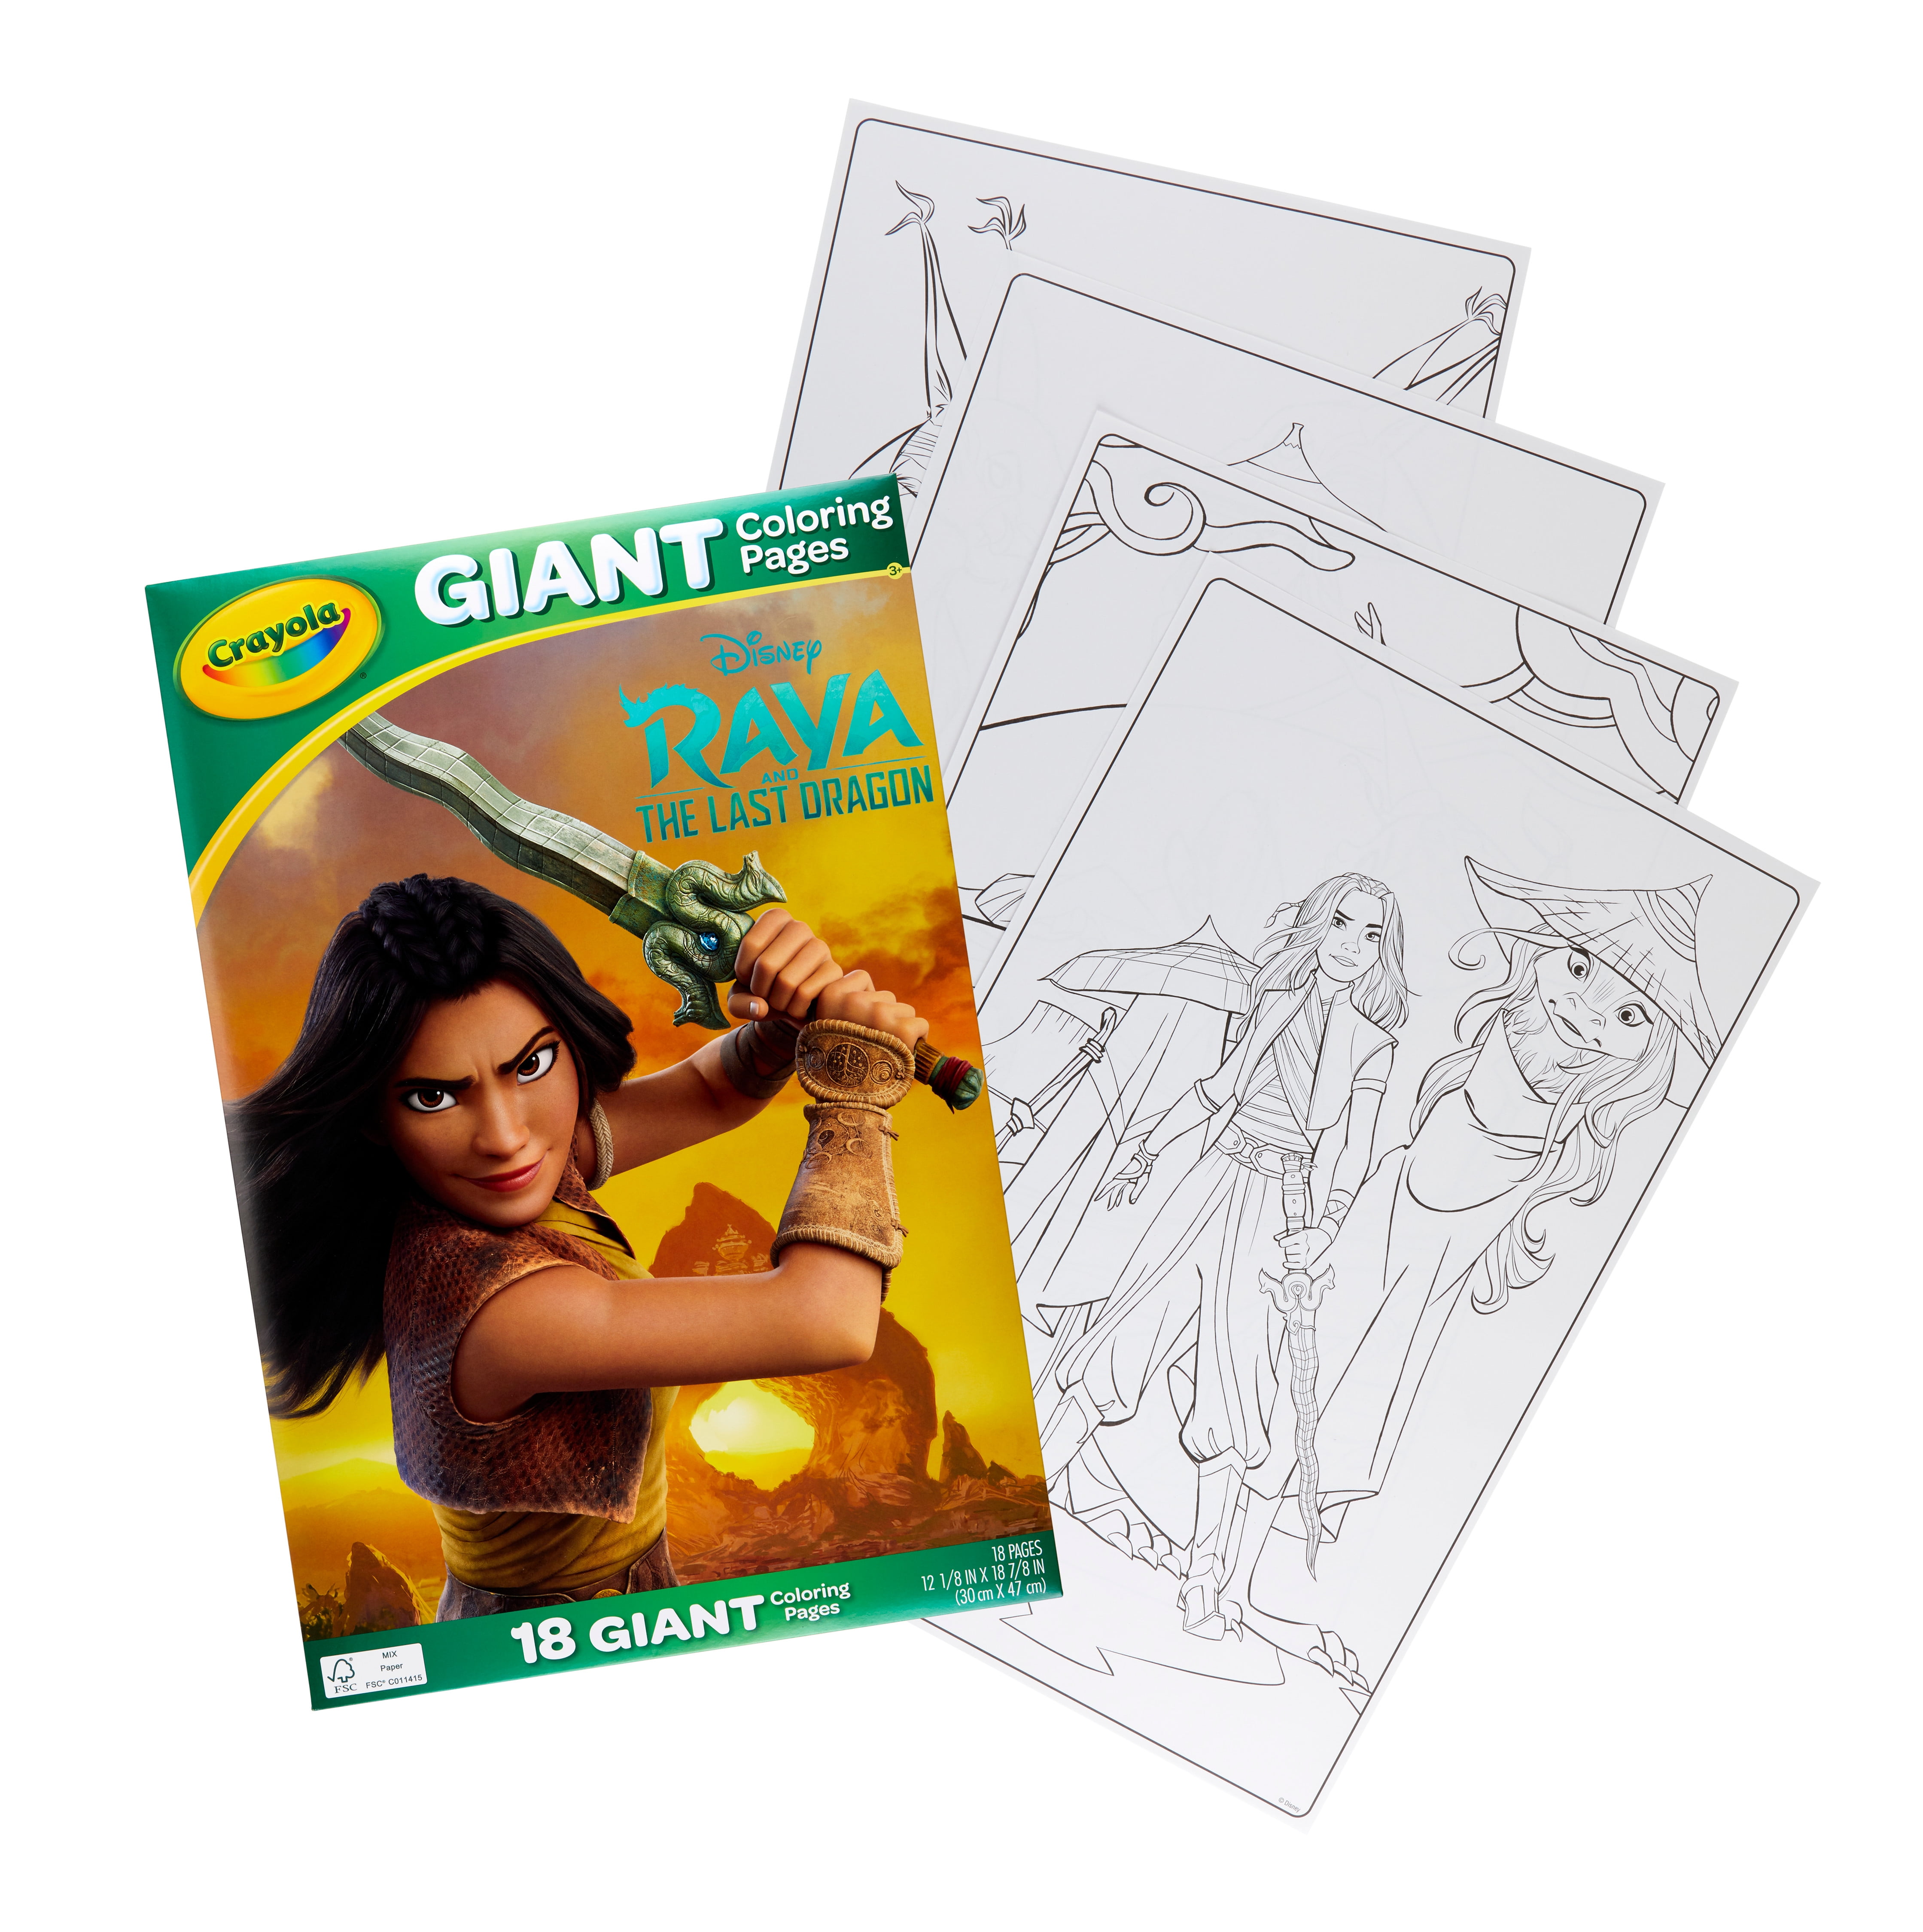 Crayola Giant Coloring Book, Featuring Raya and The Last Dragon, 18 Pages, Gift for Kids